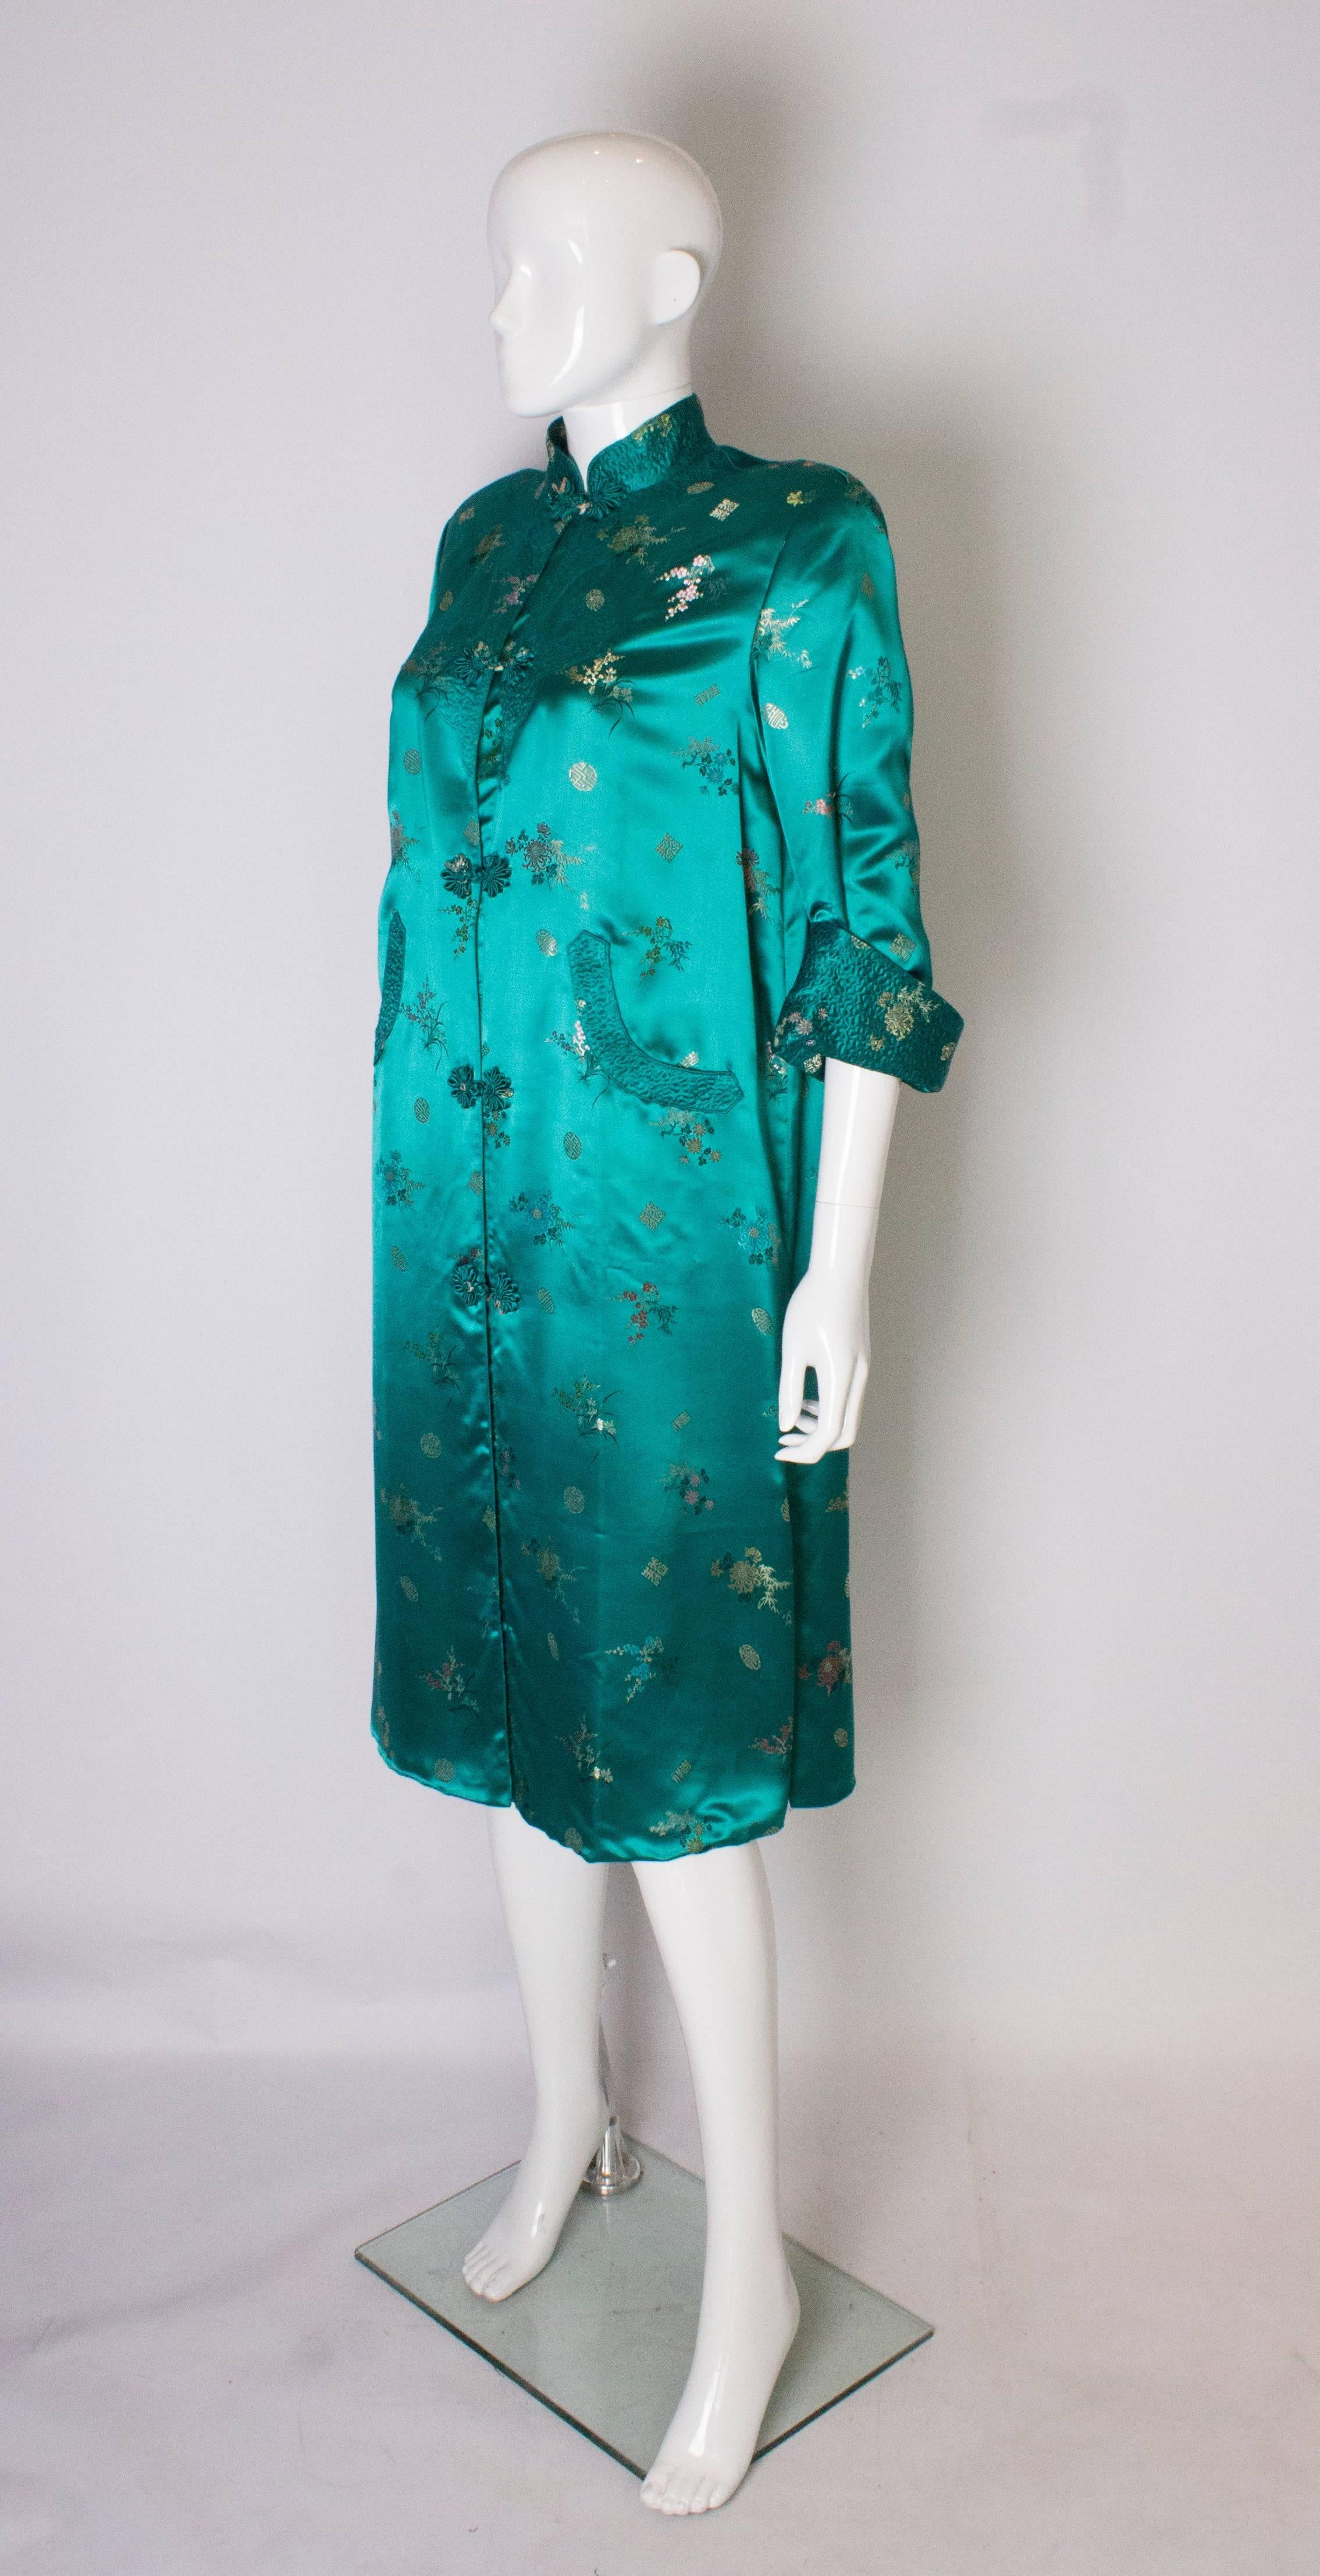 Blue A Vintage 1970s Turquoise Chinese Coat with Stand-up Collar & Decorative Pockets